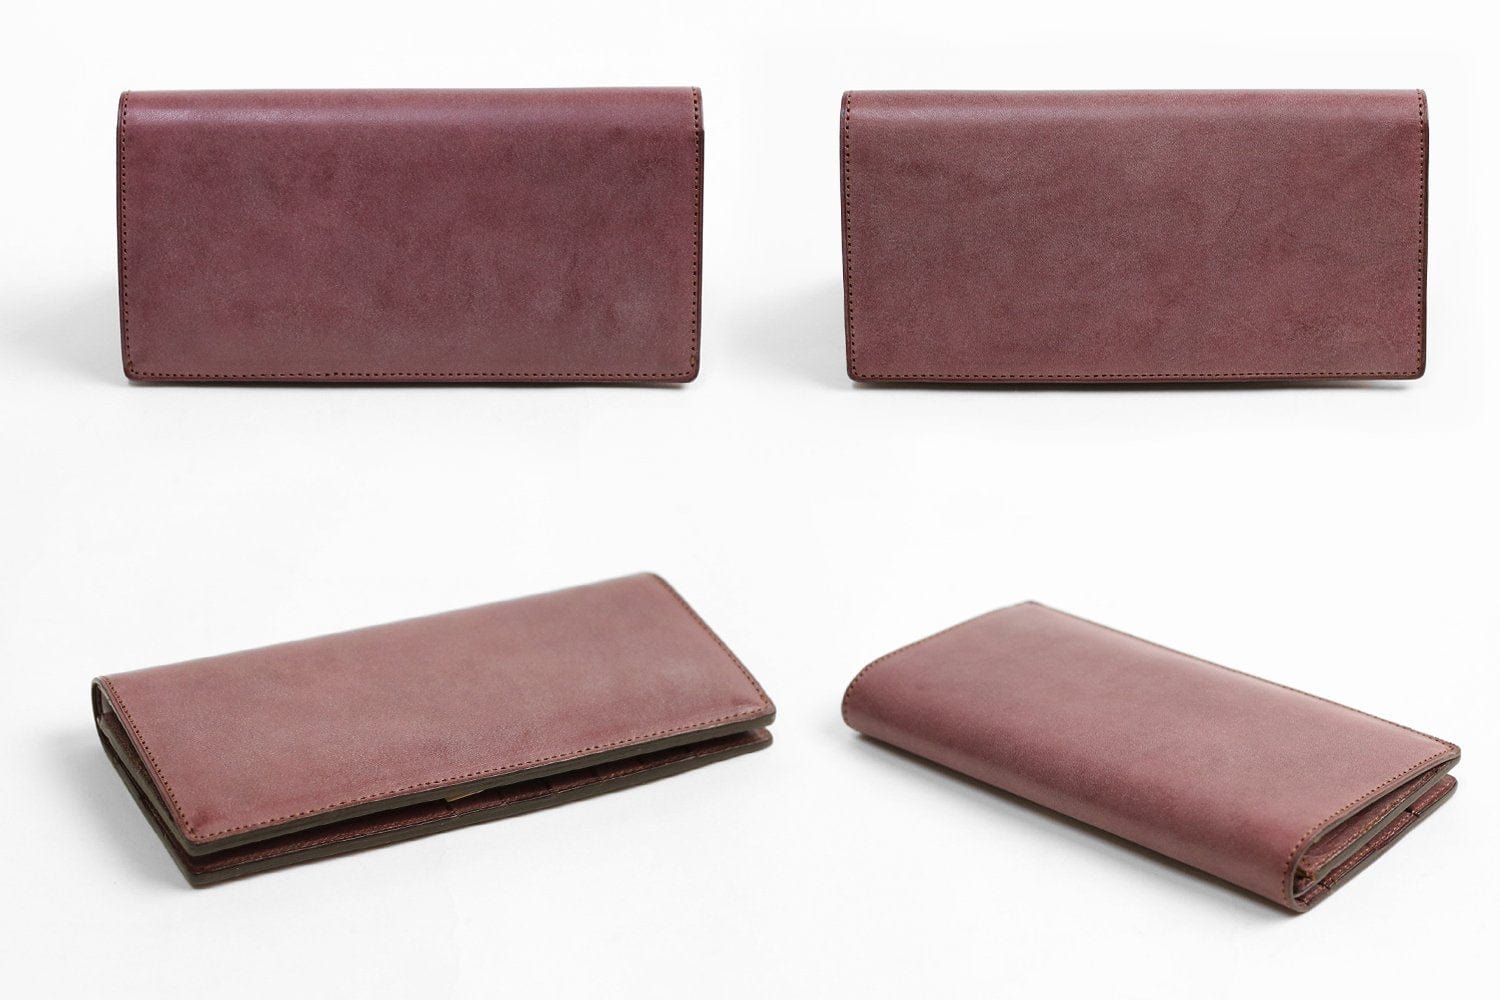 asumederu / ROROMA A bundle made of pure domestic leather "Roroma" whose color deepens the more you use it. 